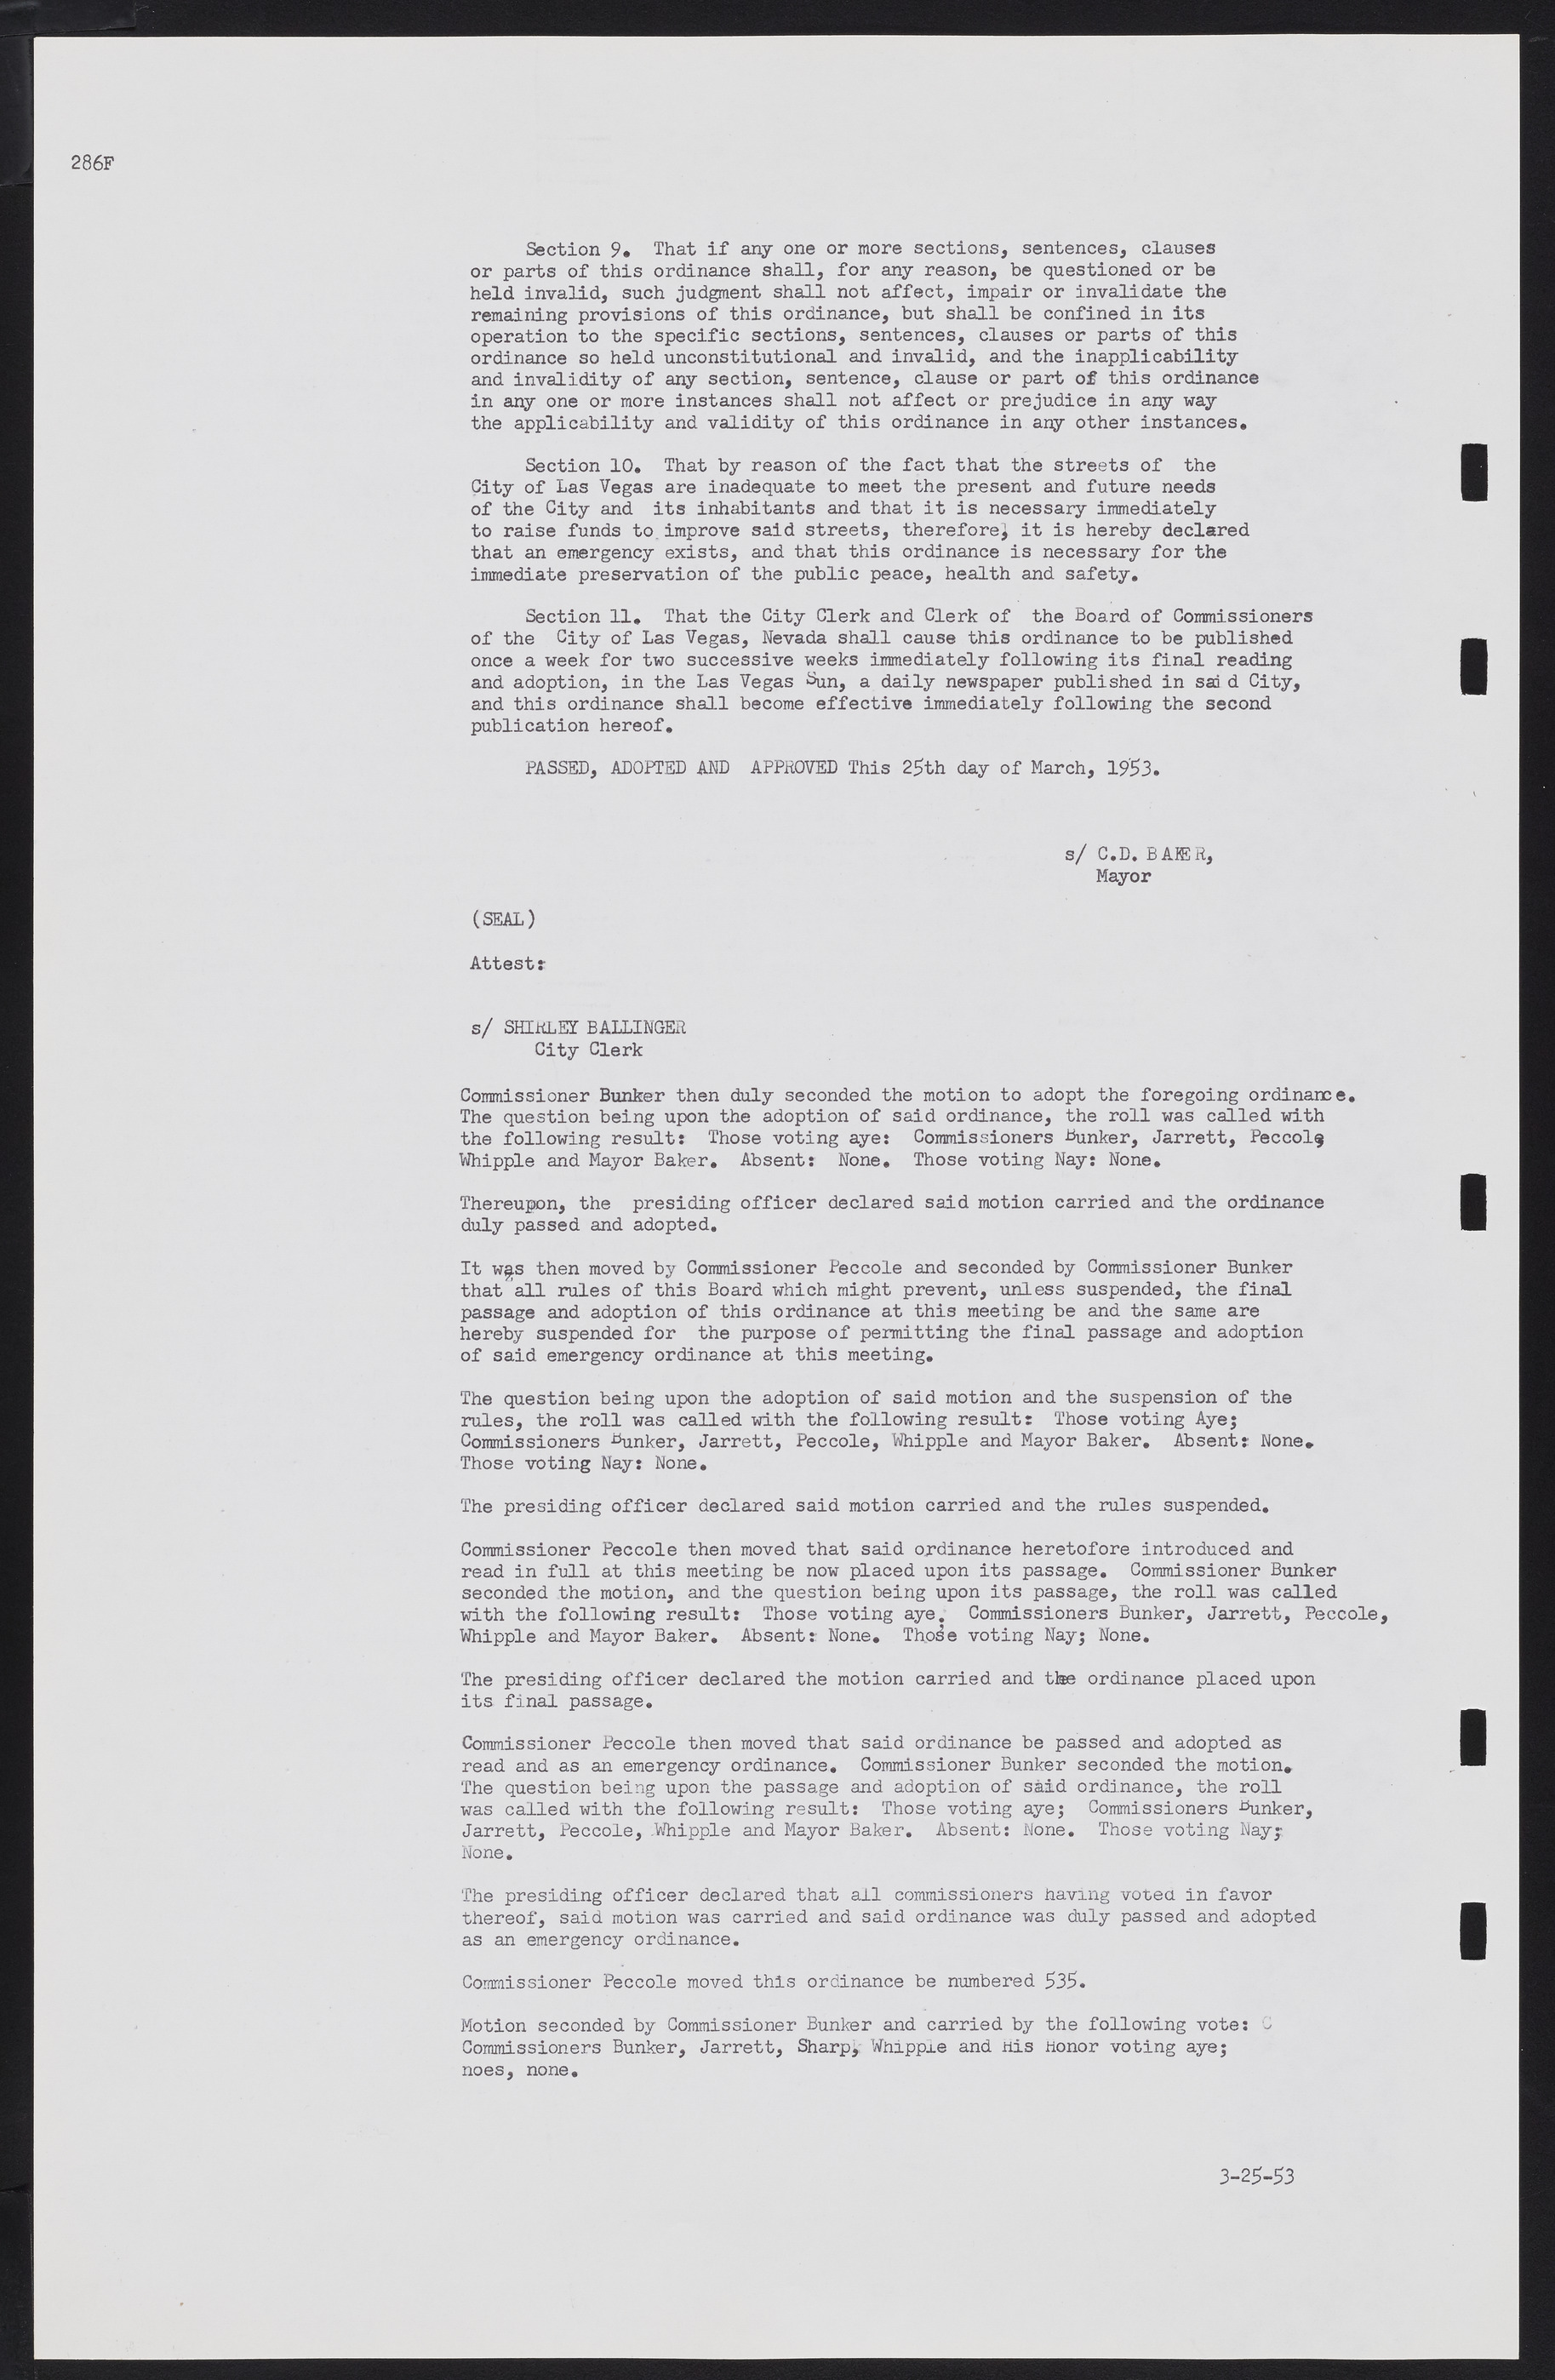 Las Vegas City Commission Minutes, May 26, 1952 to February 17, 1954, lvc000008-308